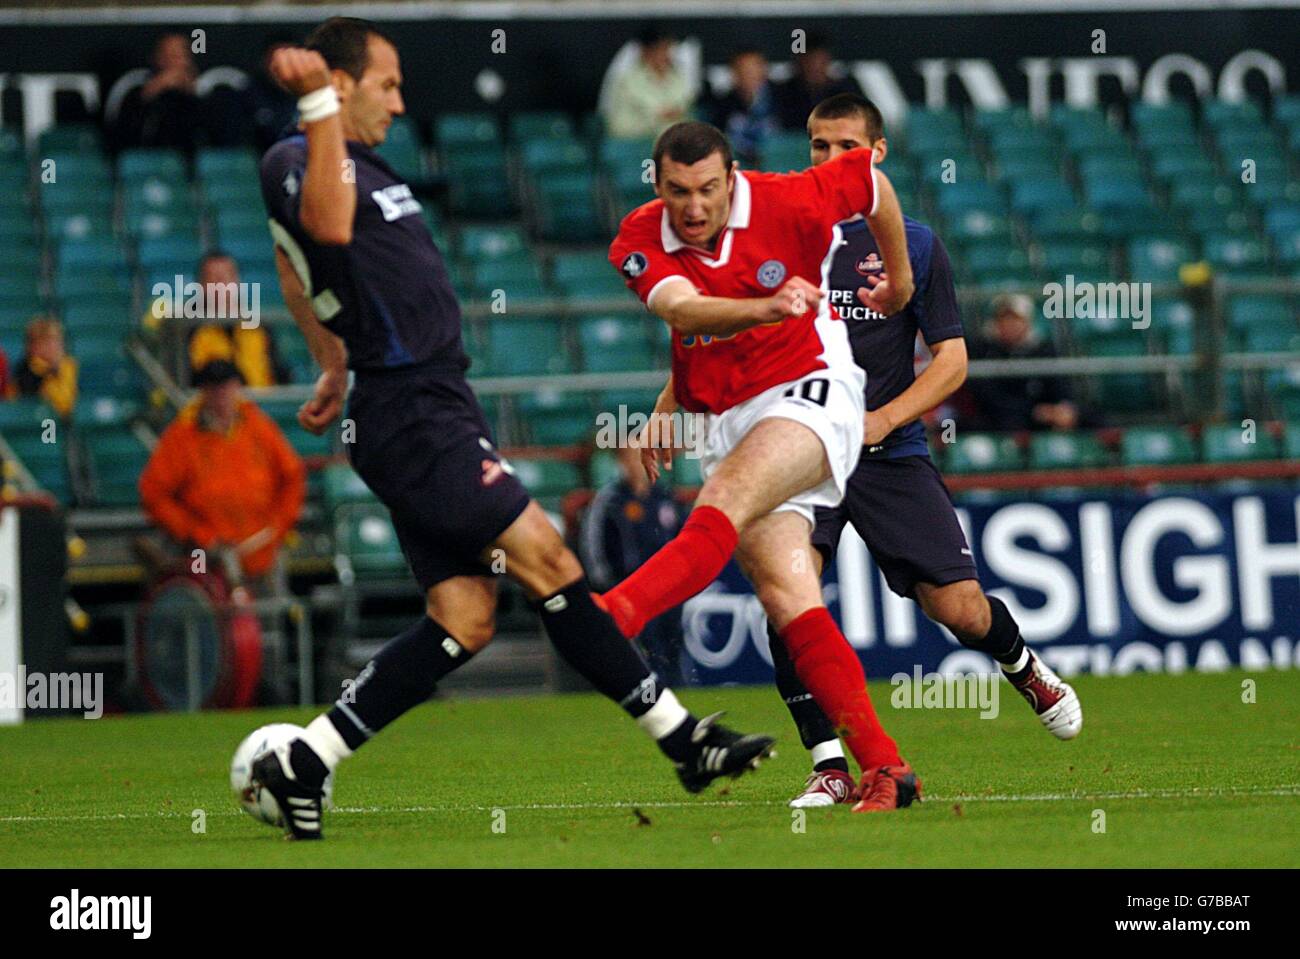 Shelbourne FC's Jason Byrne, misses a rare scoring opportunity, in the first-half of the Shelborne FC v Lille OSC UEFA Cup qualifier at Landsdowne Road, Dublin. Half-time score: Lille lead 2-0. EDITORIAL USE ONLY. Stock Photo